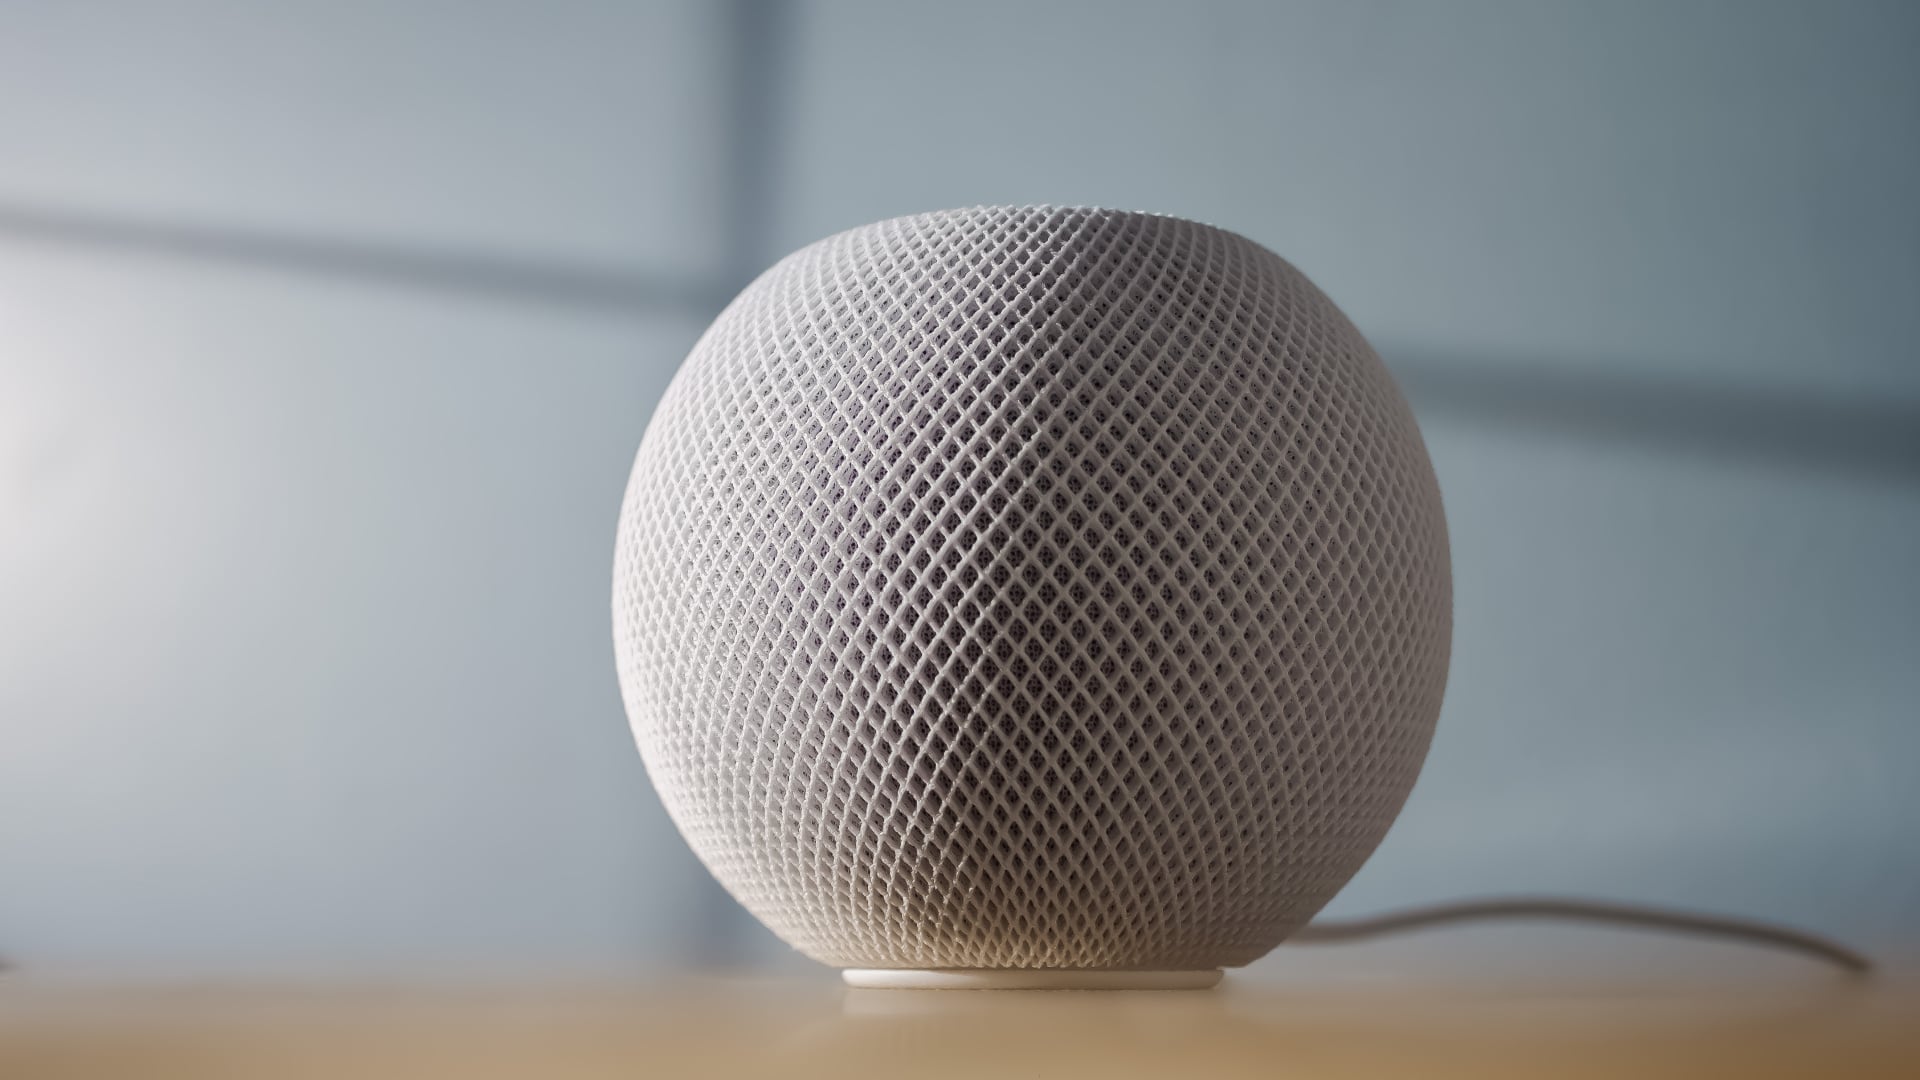 How to install the HomePod beta software to try new features ahead of release